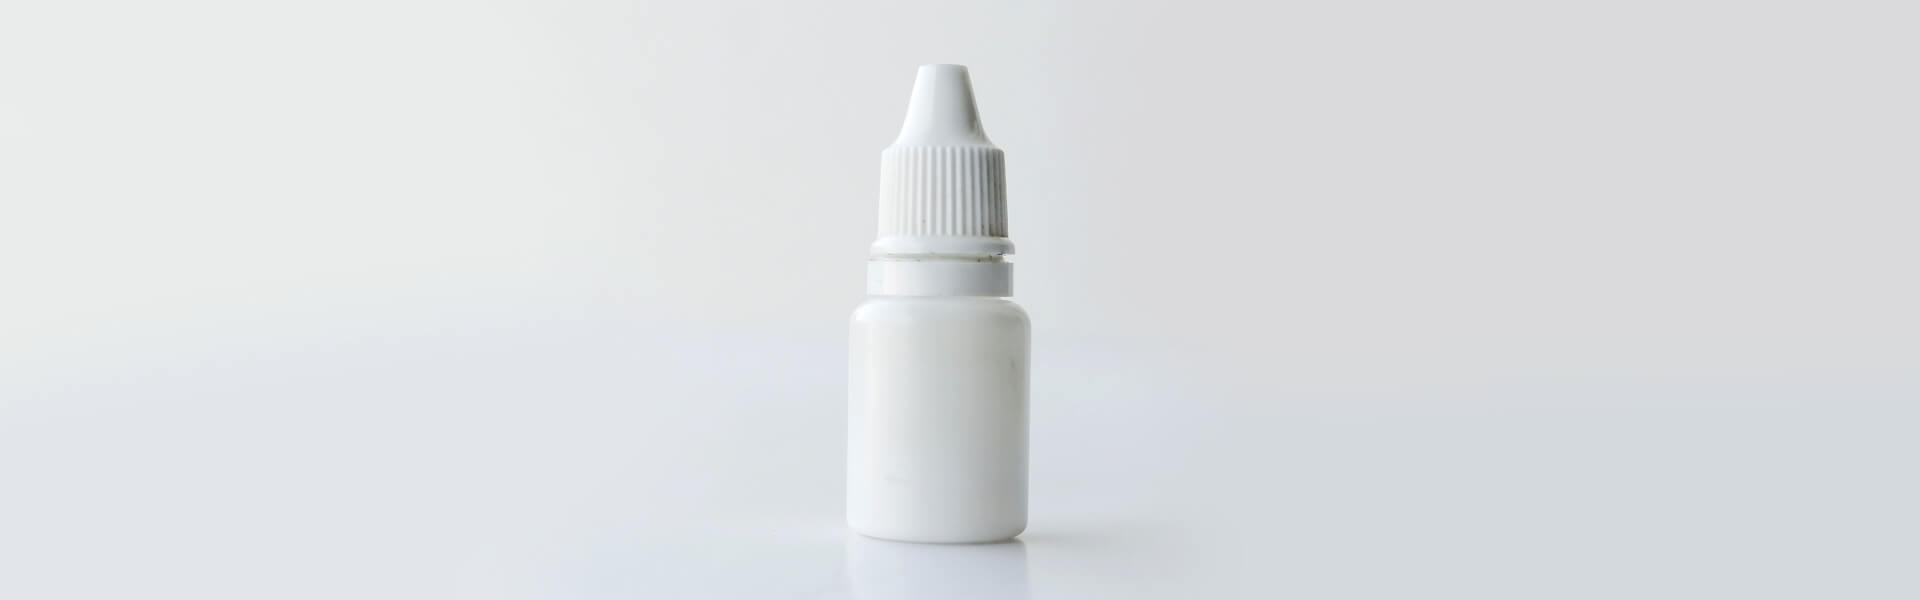 Mydriatic Eye Drops: An Information Guide